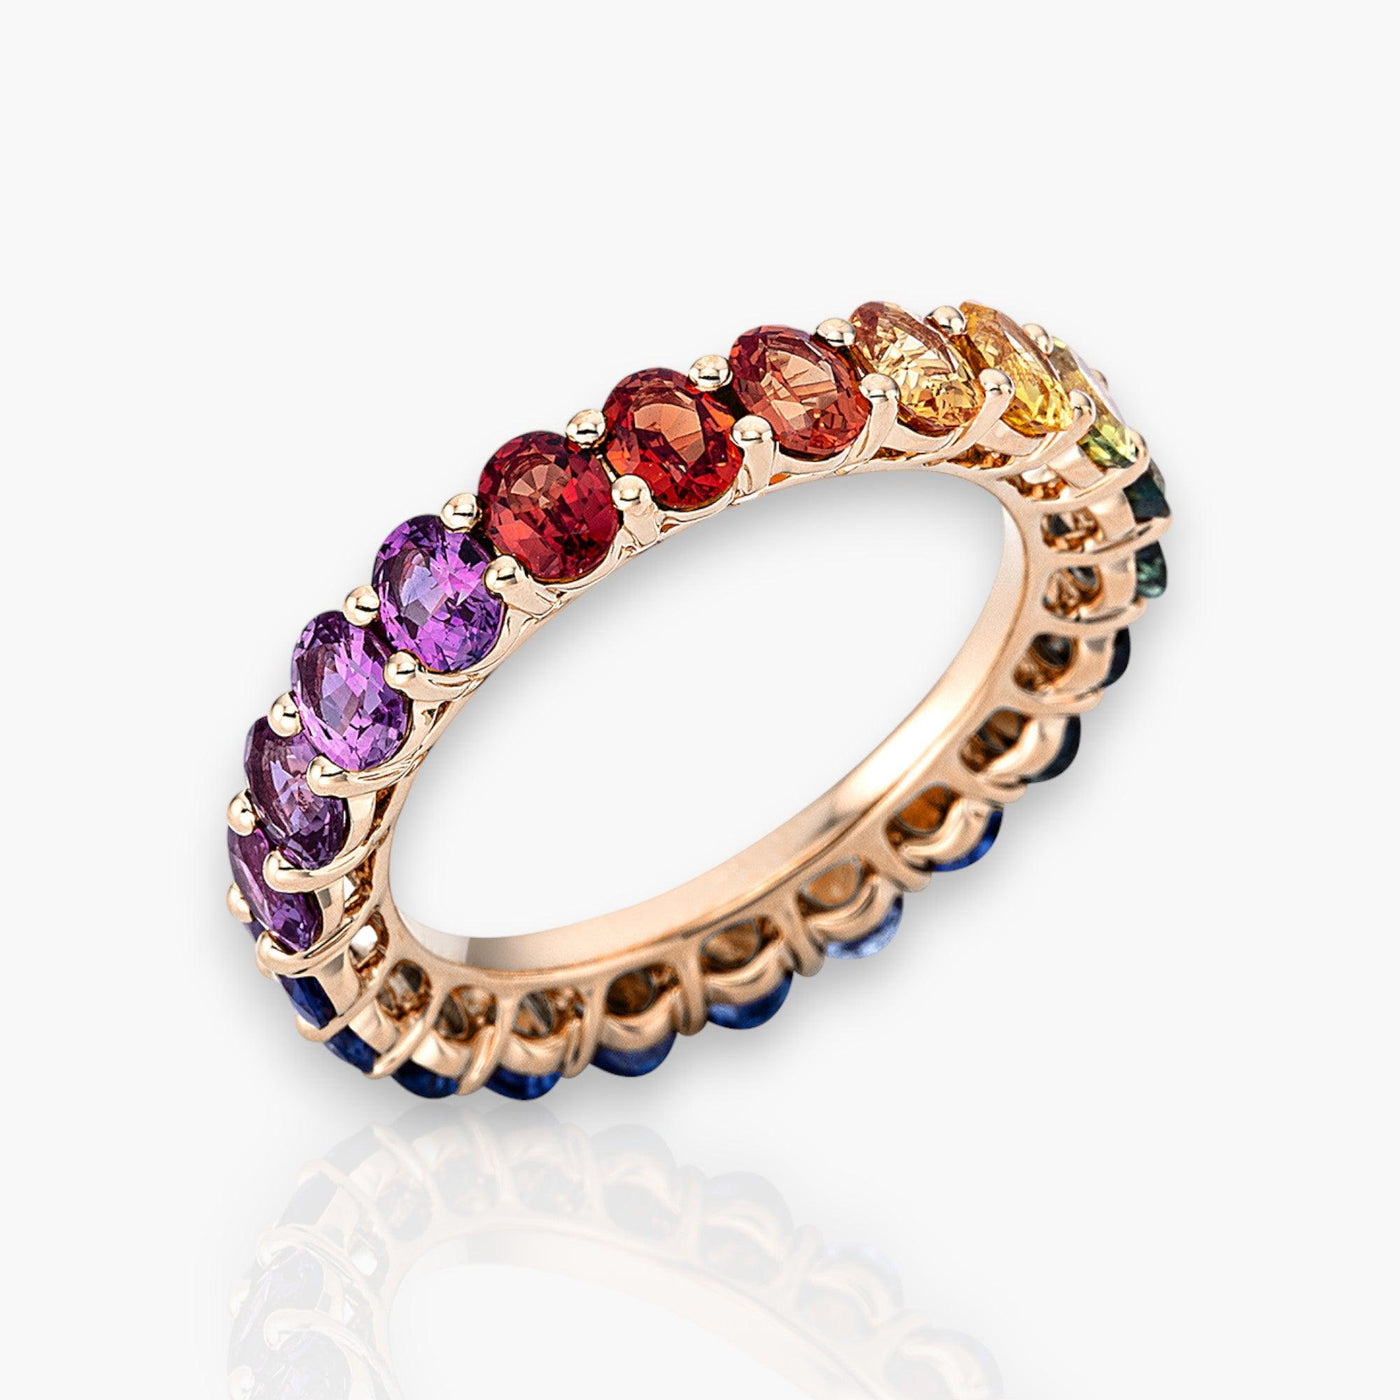 Multicolor Eternity Ring with 22 Sapphires - Moregola Fine Jewelry